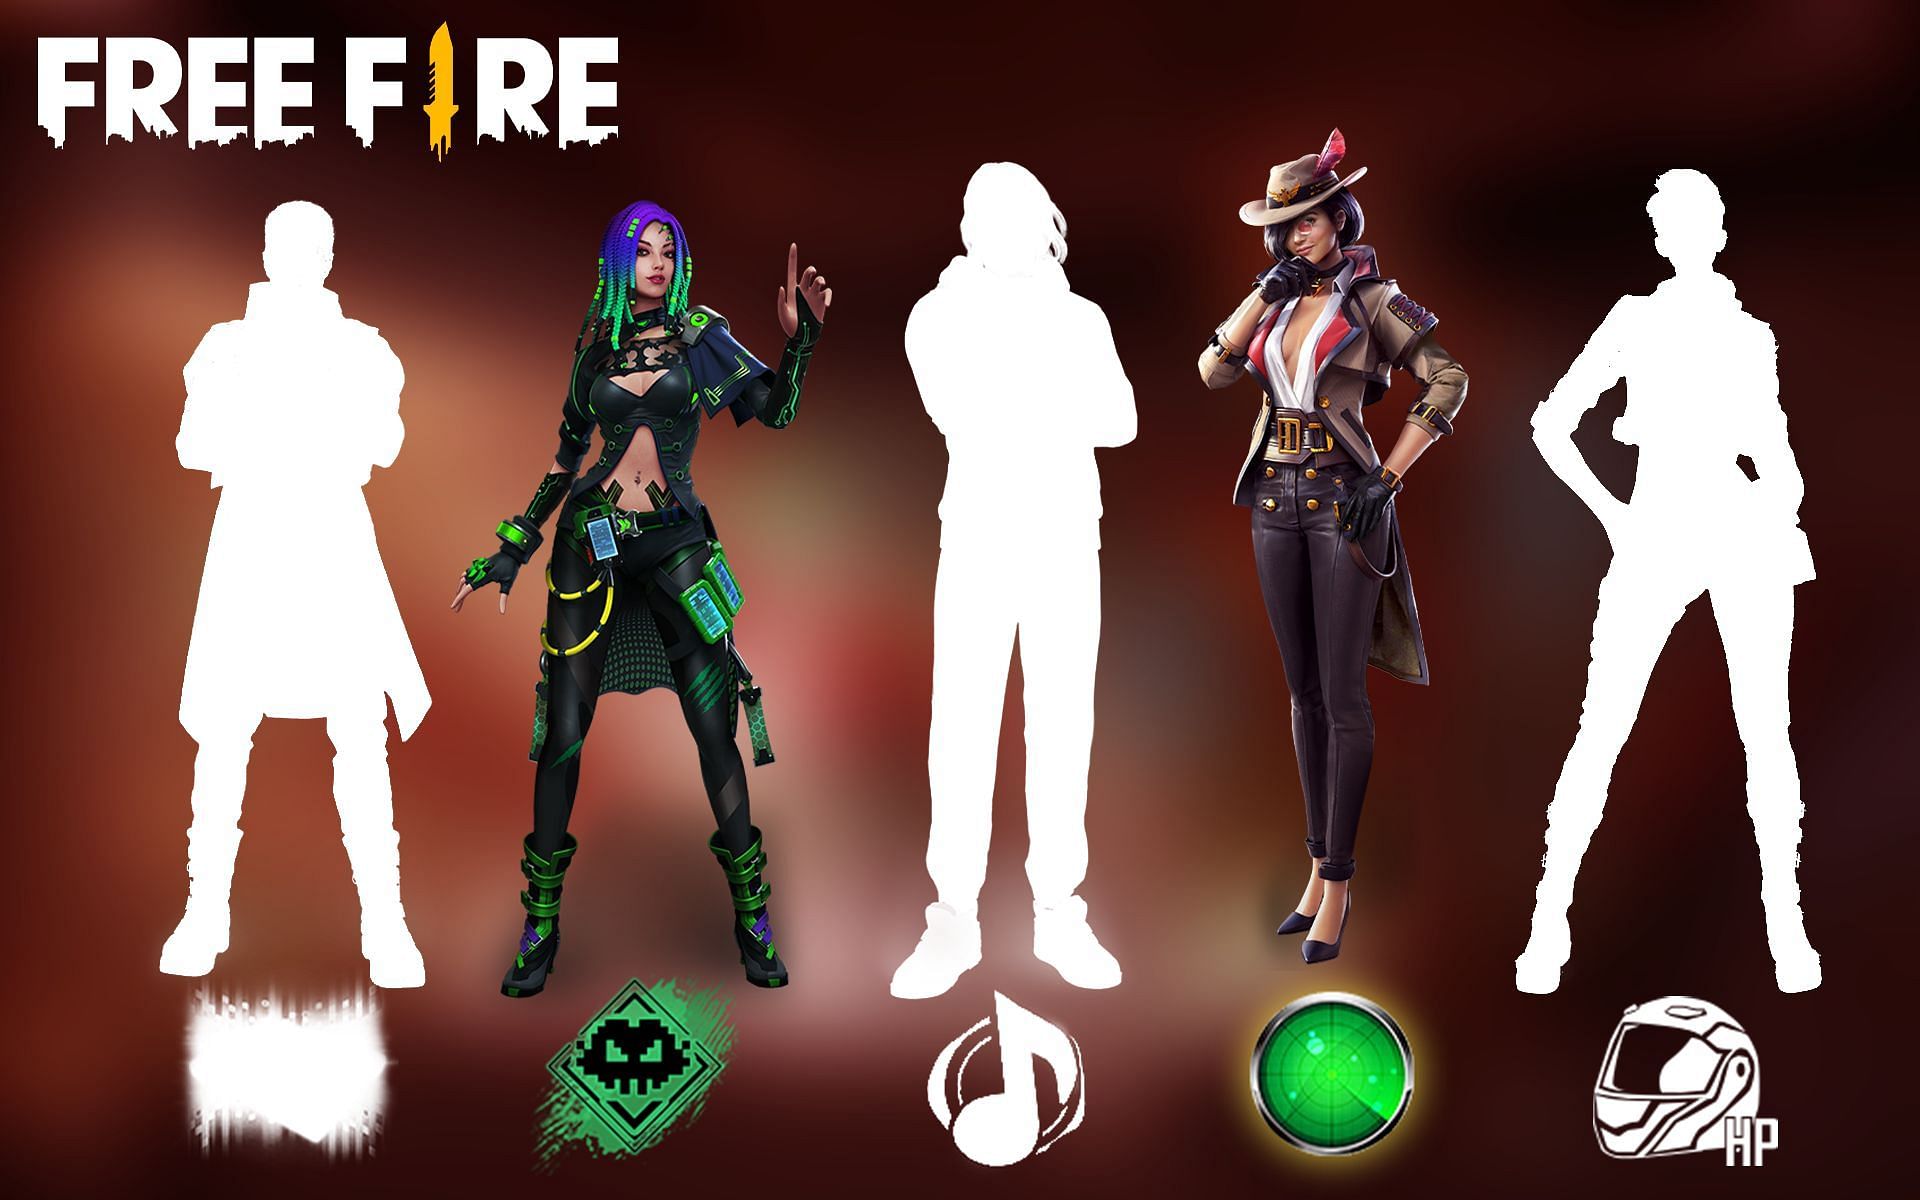 Use these Free Fire characters during a squad match to improve the odds of winning (Image via Sportskeeda)